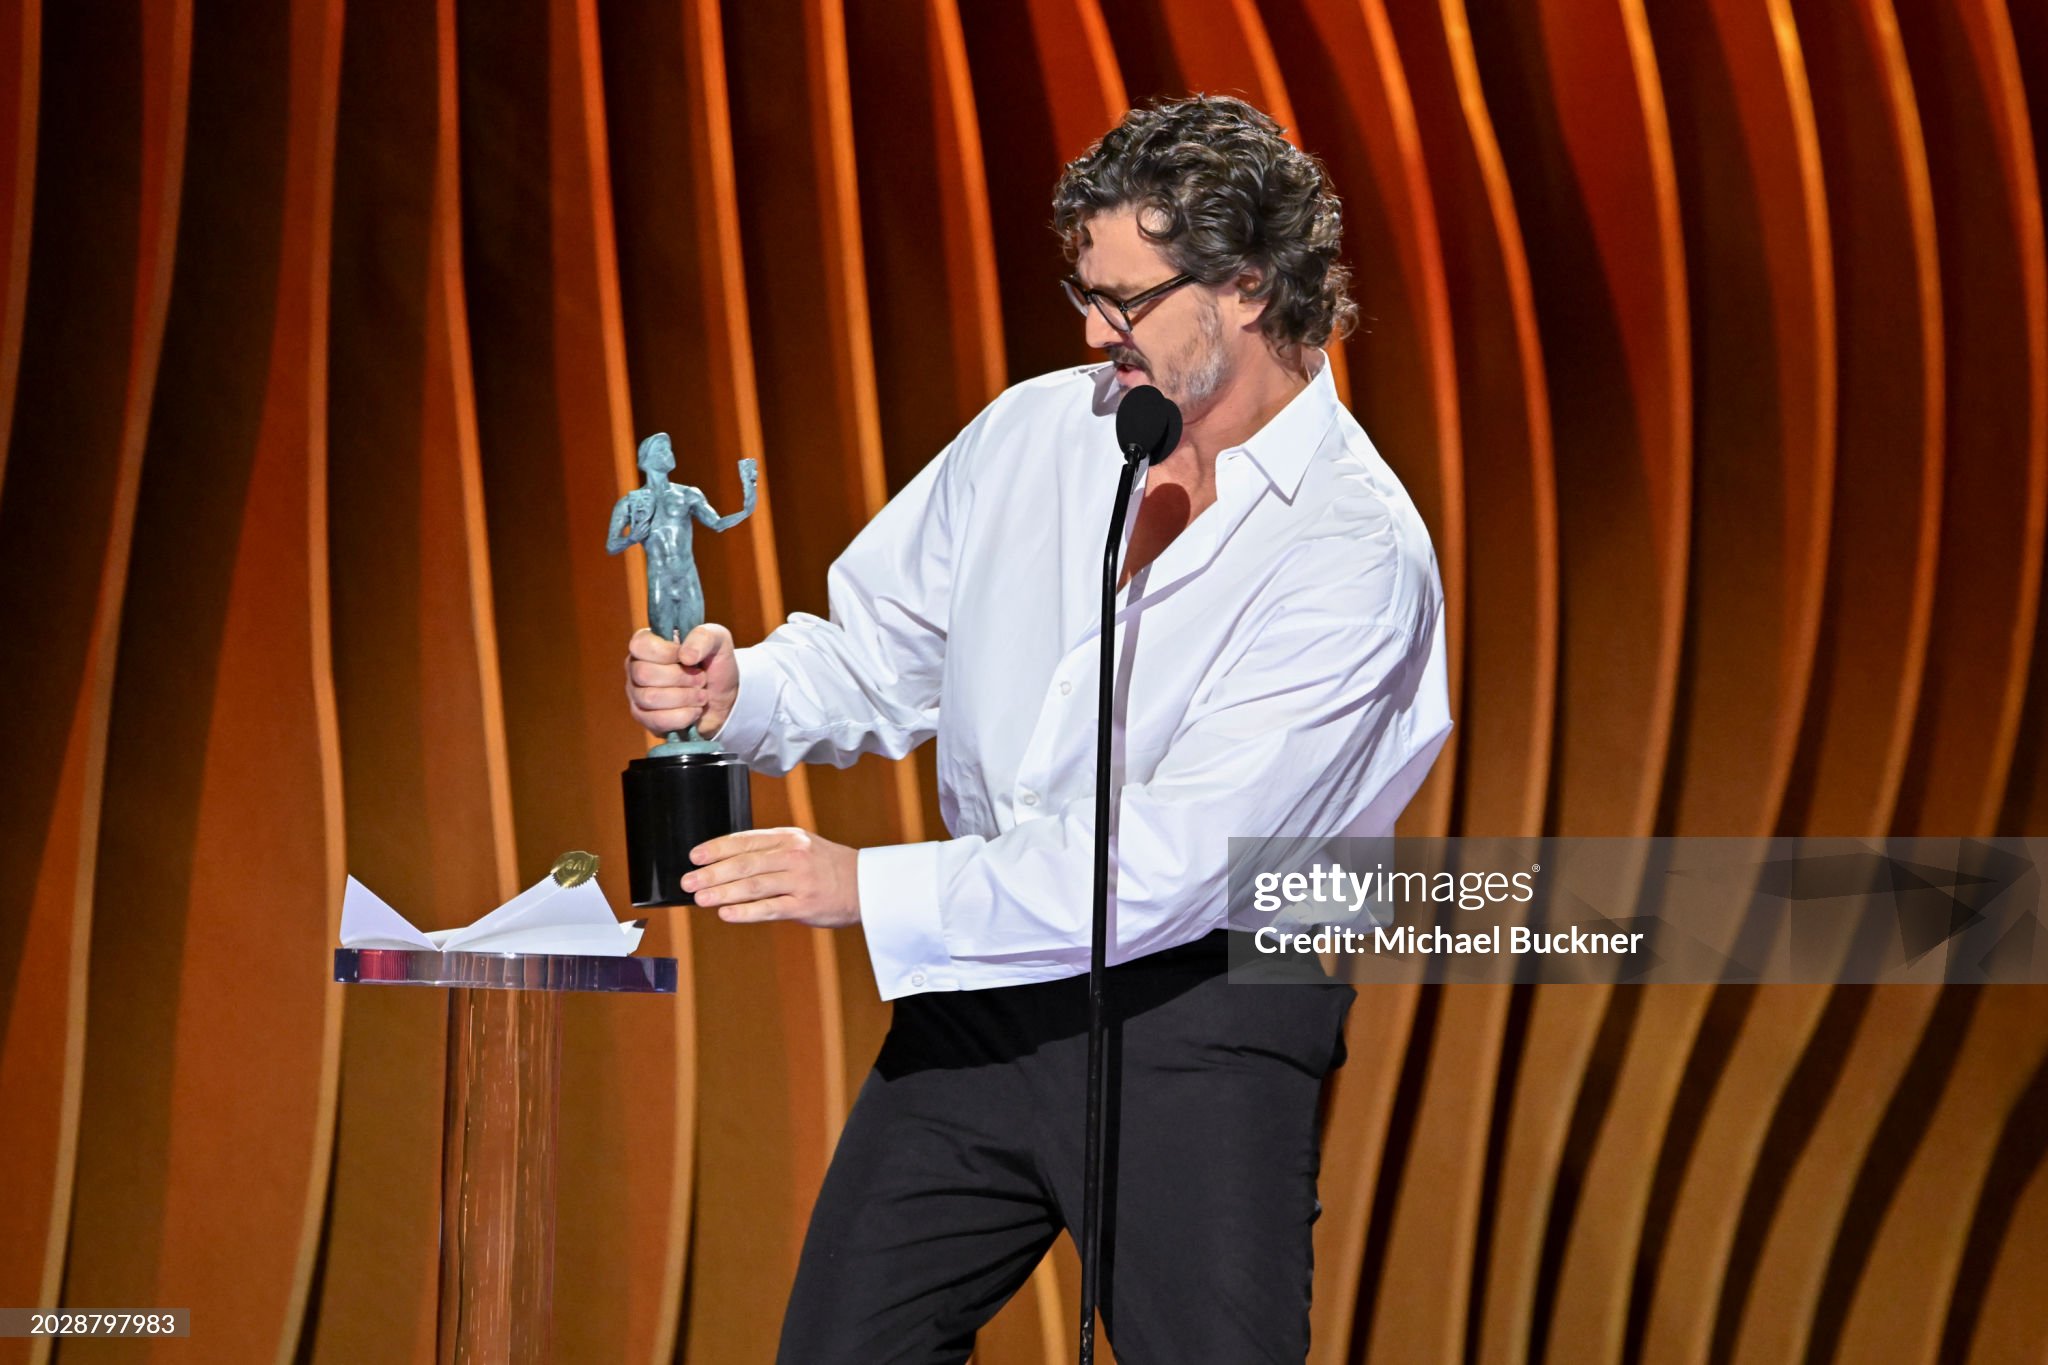 30th-annual-screen-actors-guild-awards-show.jpg